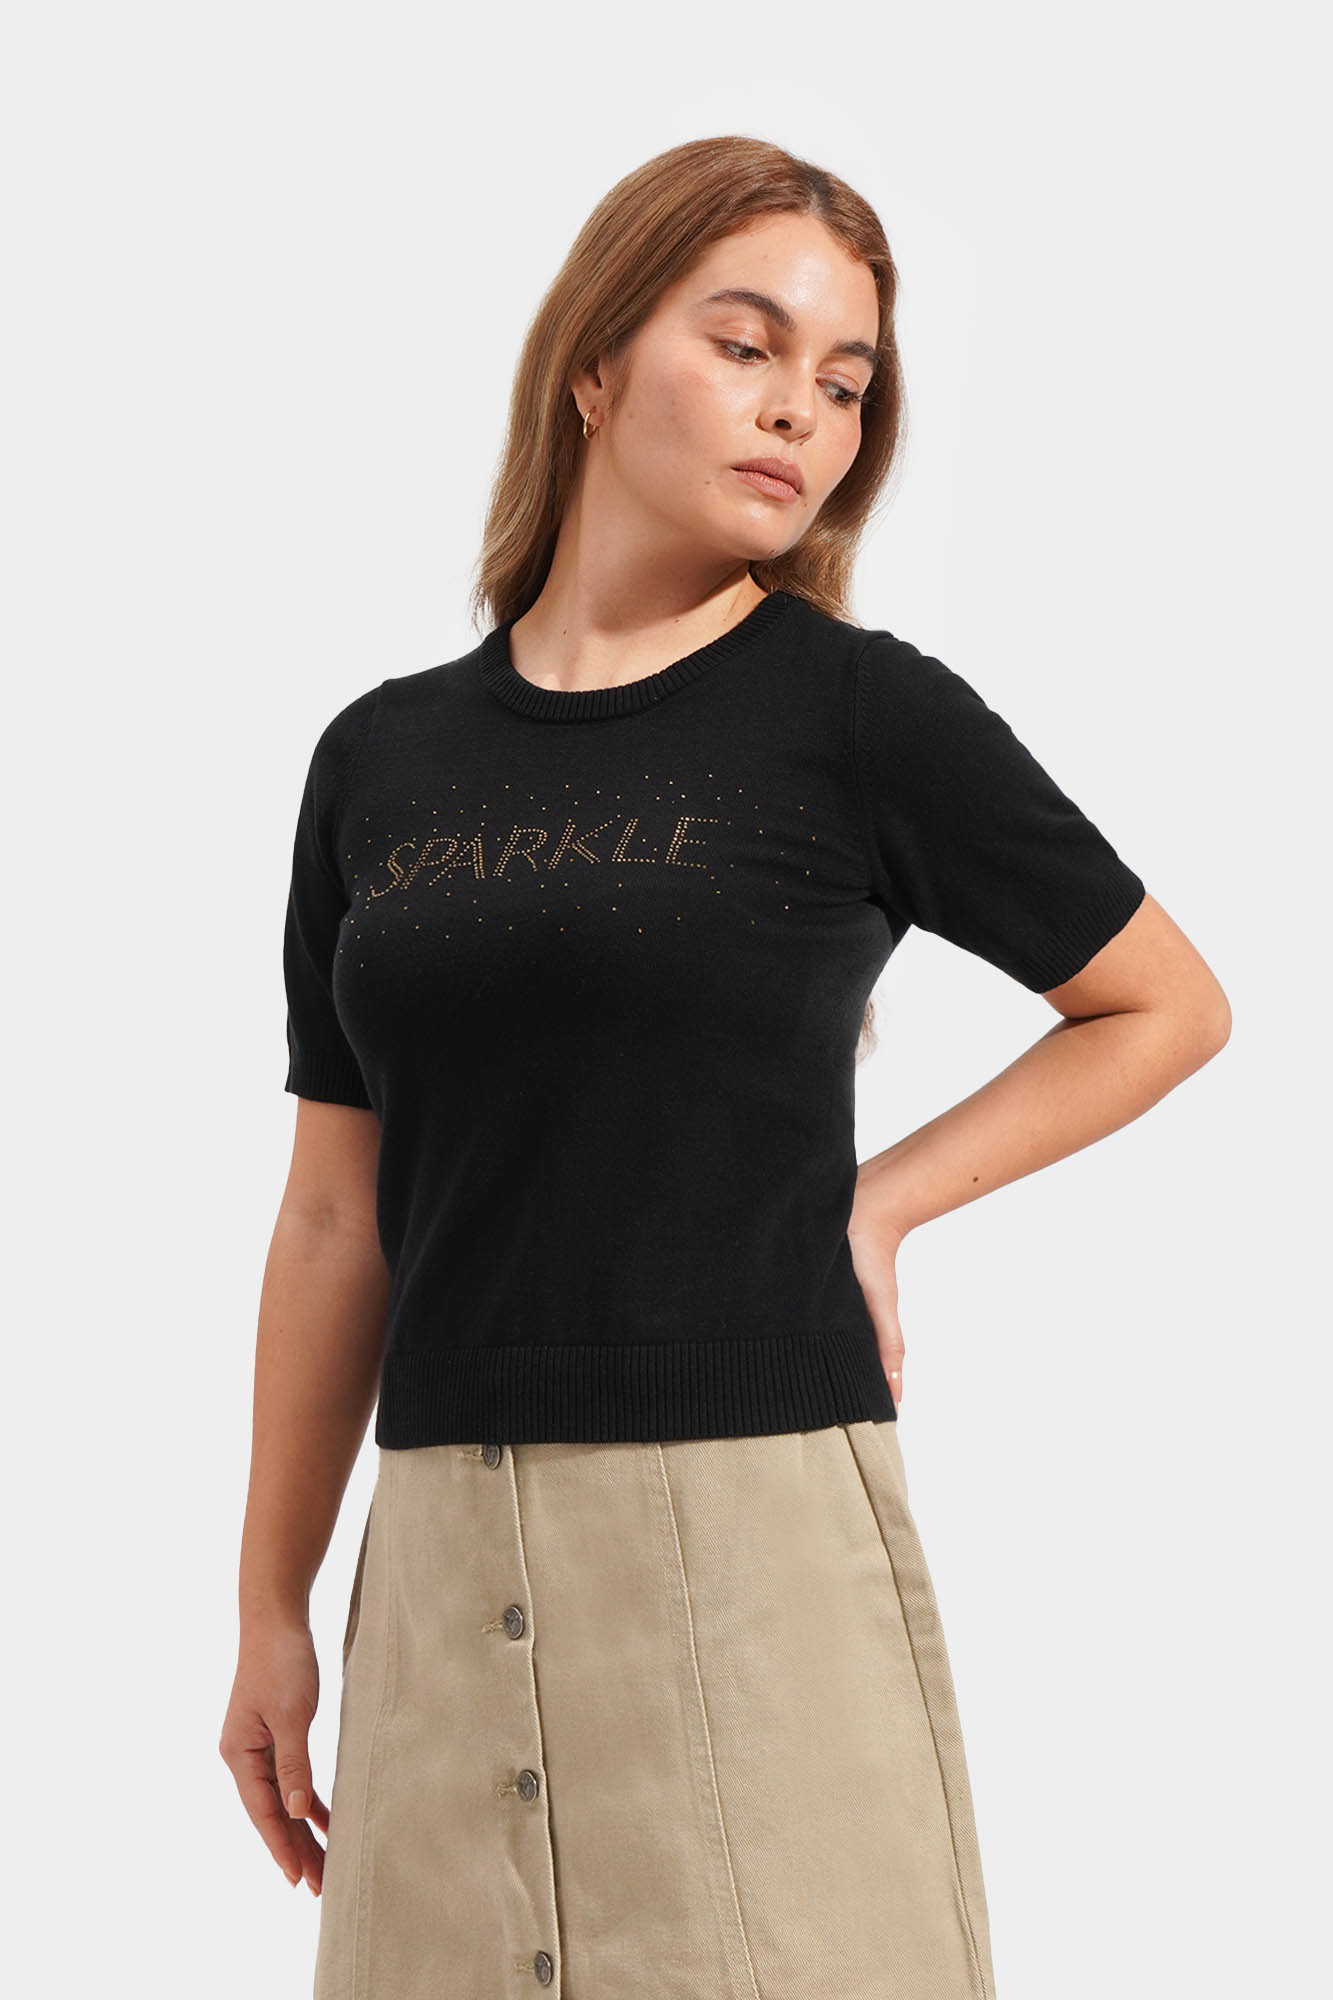 Sparkle Flat Knit Graphic Tee